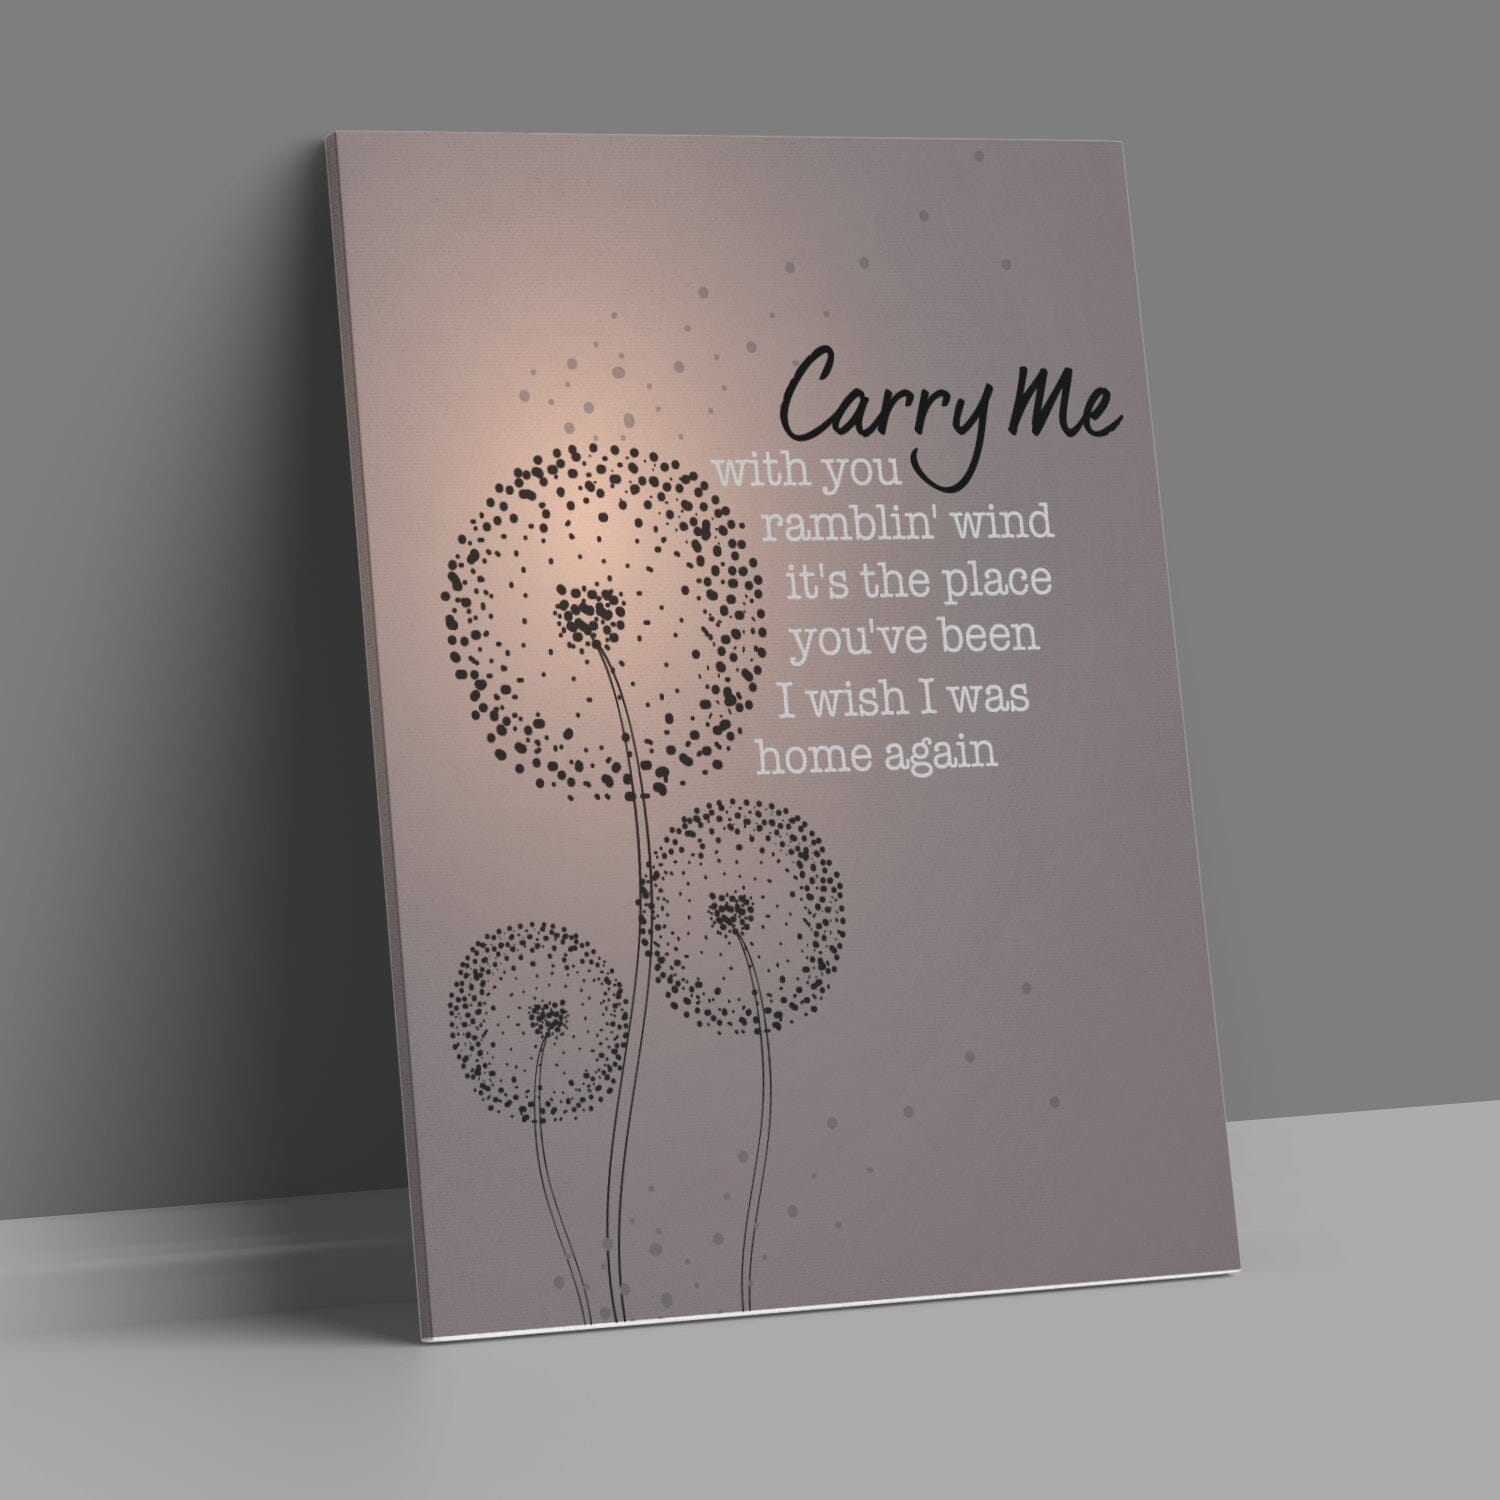 Carry Me by the Stampeders - 70s Song Lyric Wall Art Song Lyrics Art Song Lyrics Art 11x14 Canvas Wrap 